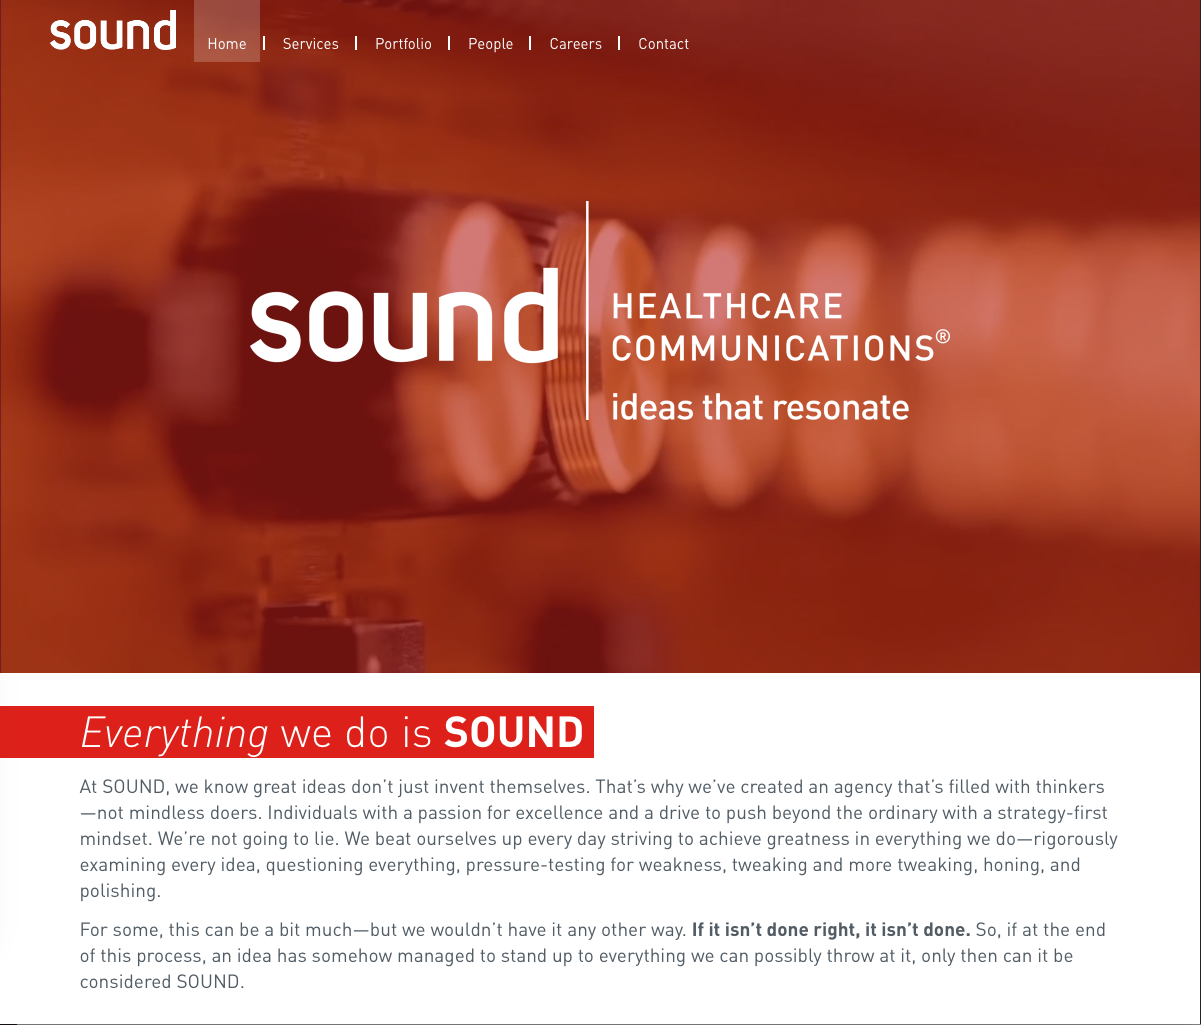 The new Sound homepage.